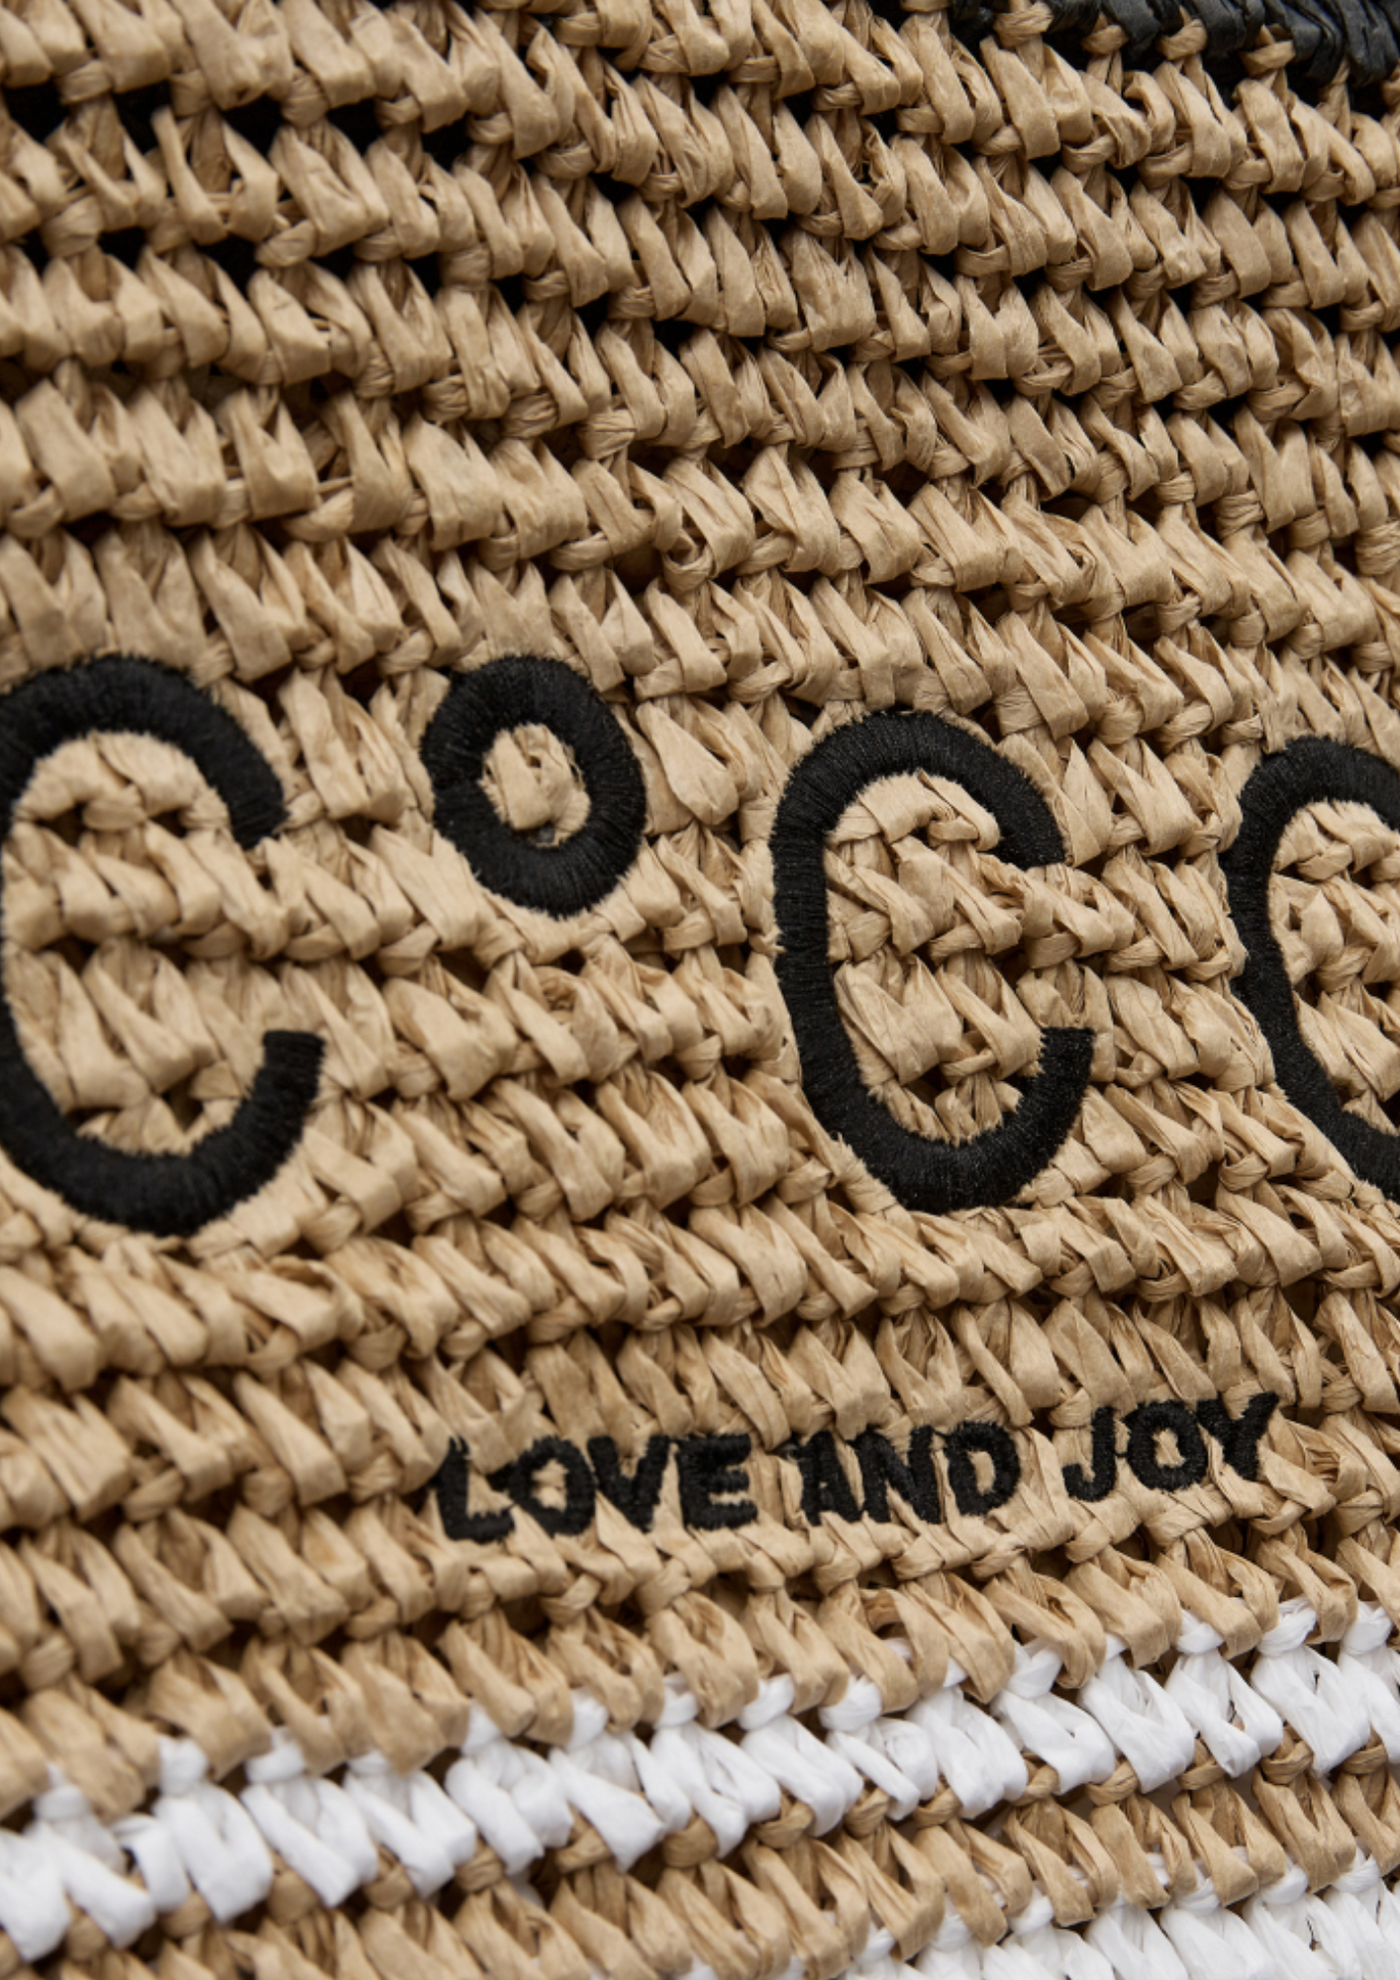 Co' Couture |  CocoCC Straw Bag Straw